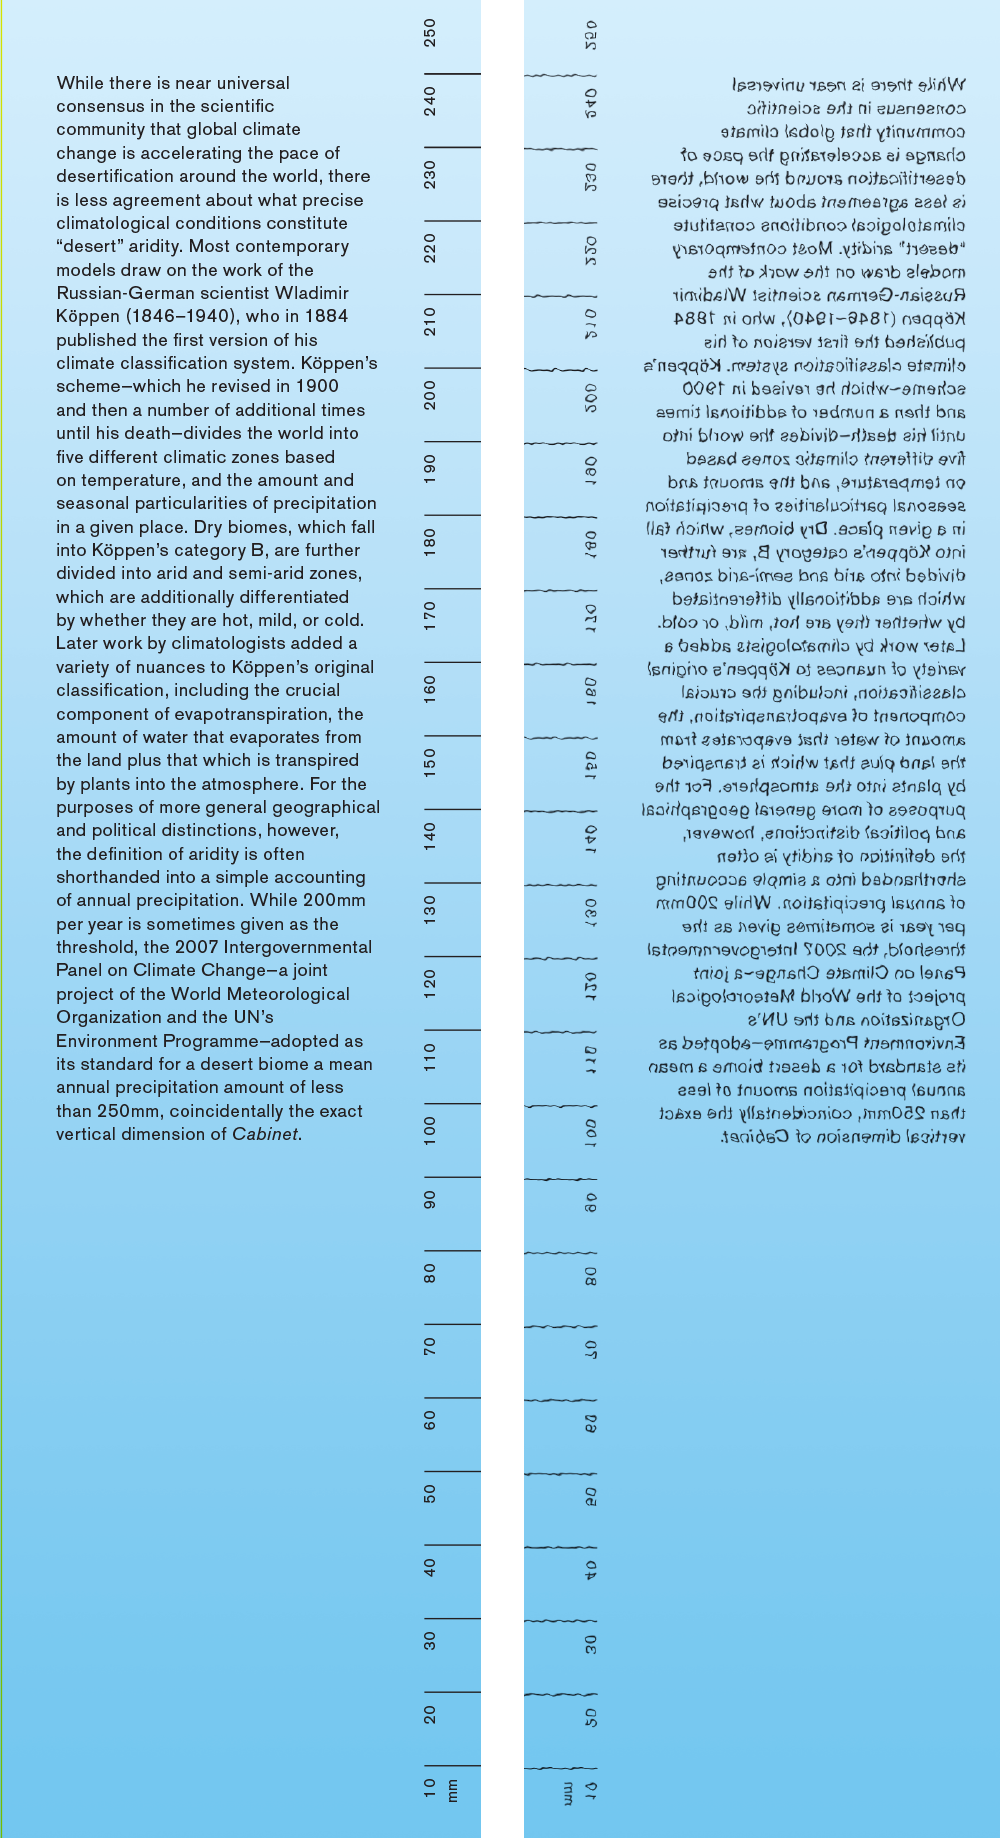 The front and back of a bookmark. The front depicts text explaining that scientists do not agree about what precise conditions constitute 'desert' aridity. Most contemporary models draw on the work of Wladimir Köppen, whose climate classification system divides the world into five climatic zones based on temperature and precipitation. Later work by climatologists added evapotranspiration. For general purposes, the definition of aridity is often a simple accounting of annual precipitation. Two hundred millimeters per year is sometimes given as the threshold, but the two thousand seven IPCC adopted as its standard for a desert biome a mean annual precipitation amount of less than two hundred fifty millimeters, coincidentally the exact vertical dimension of 